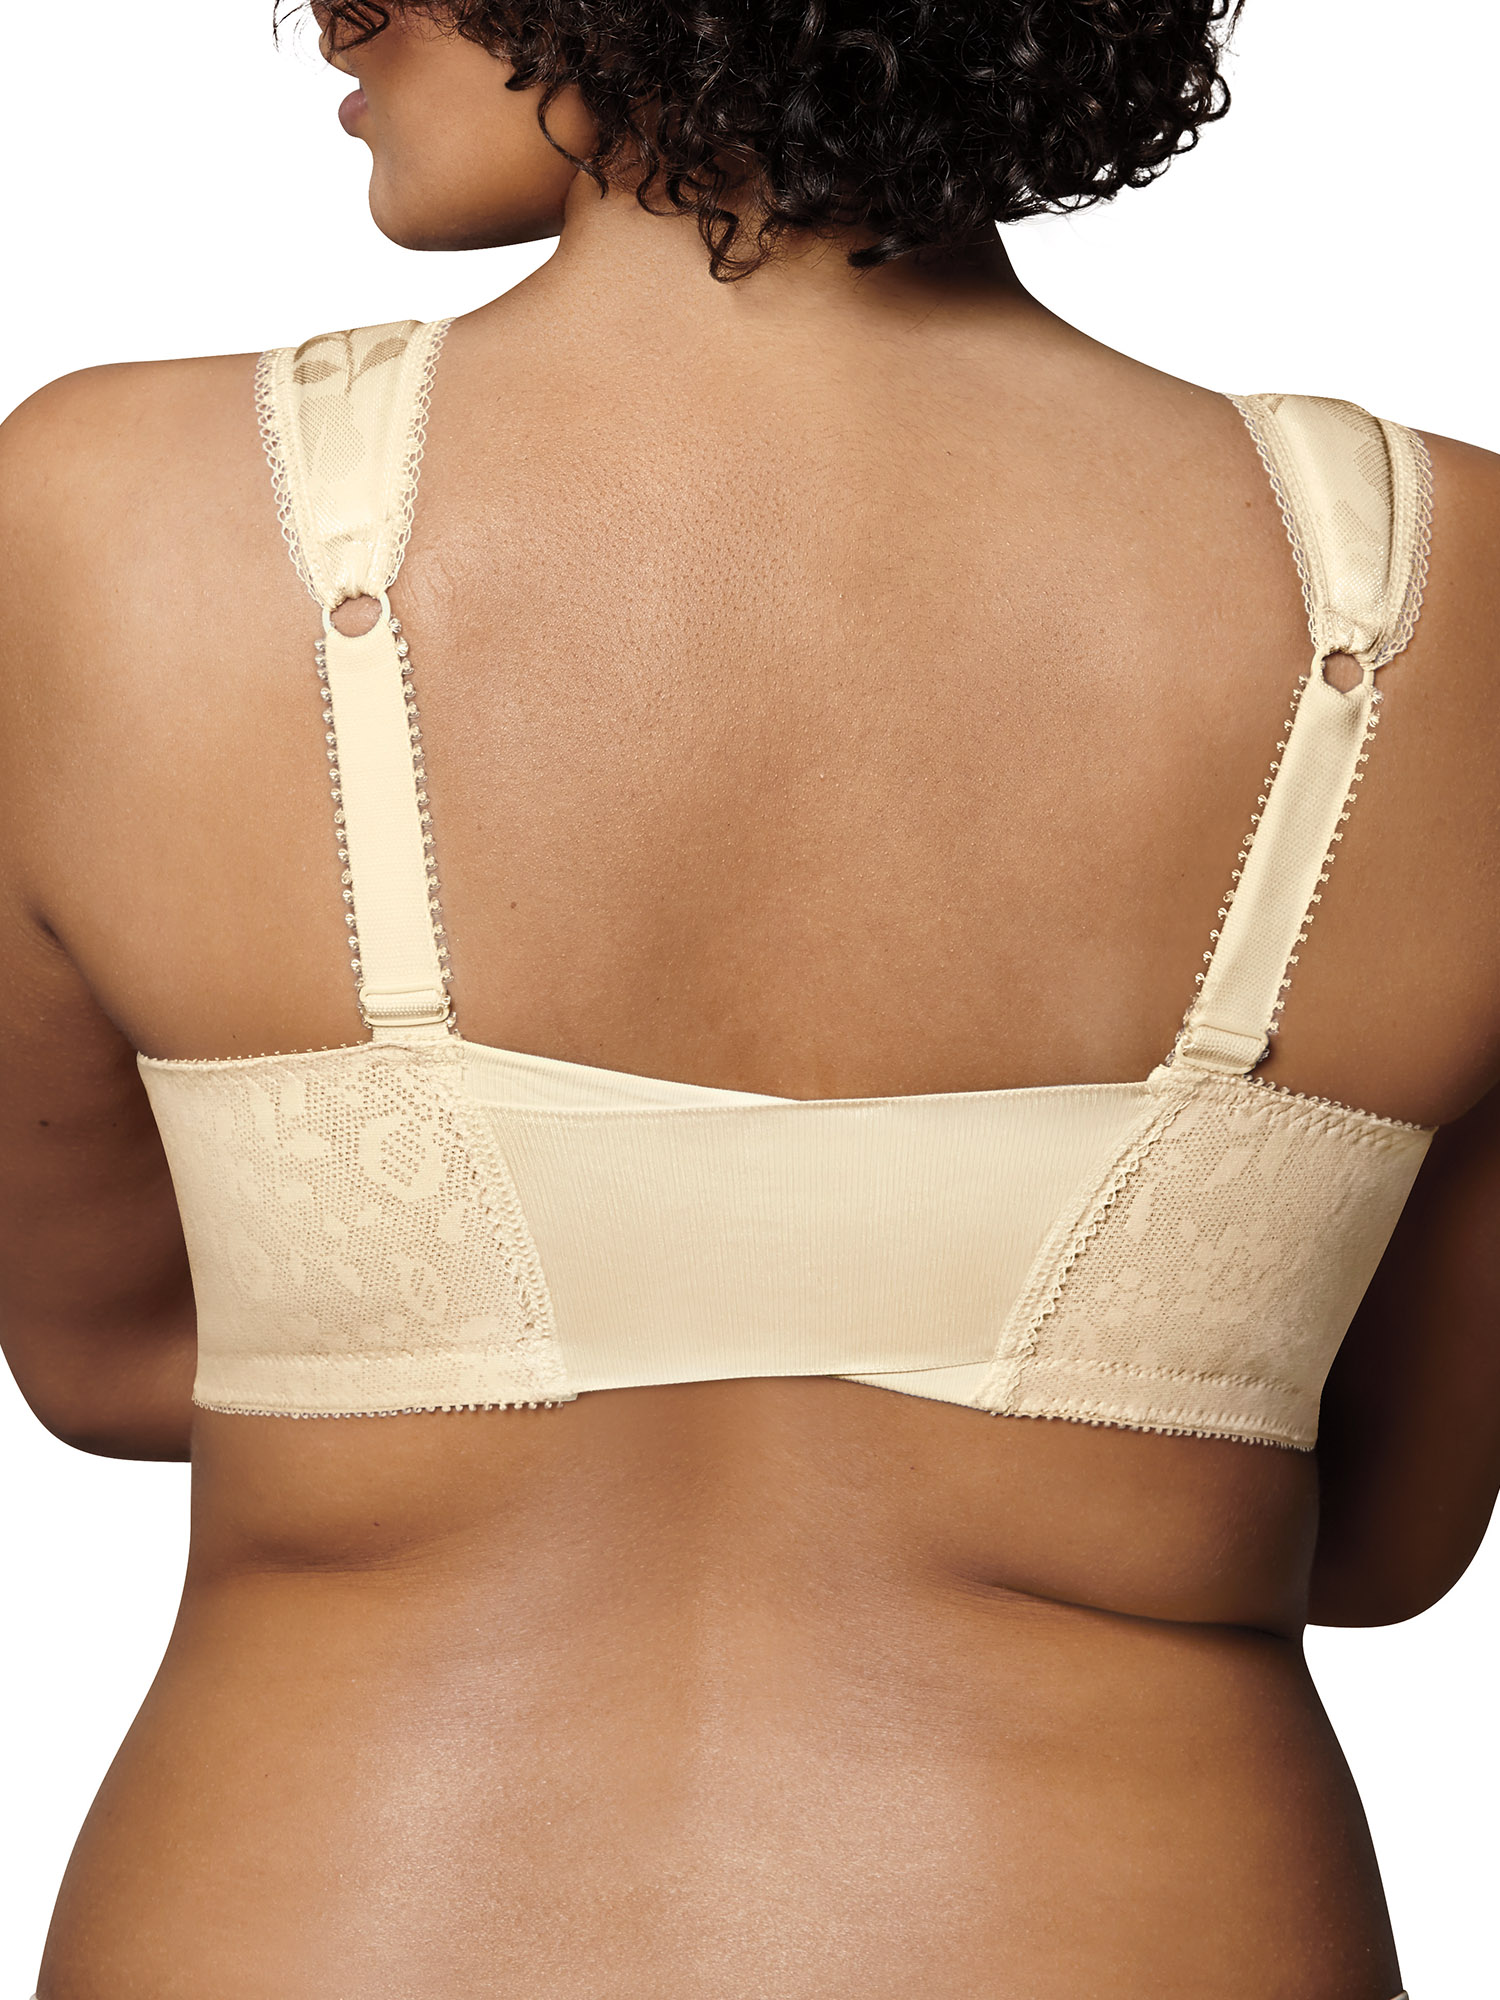 Playtex Womens 18 Hour Front-Close Wire-Free Bra Style-4695 - image 4 of 5